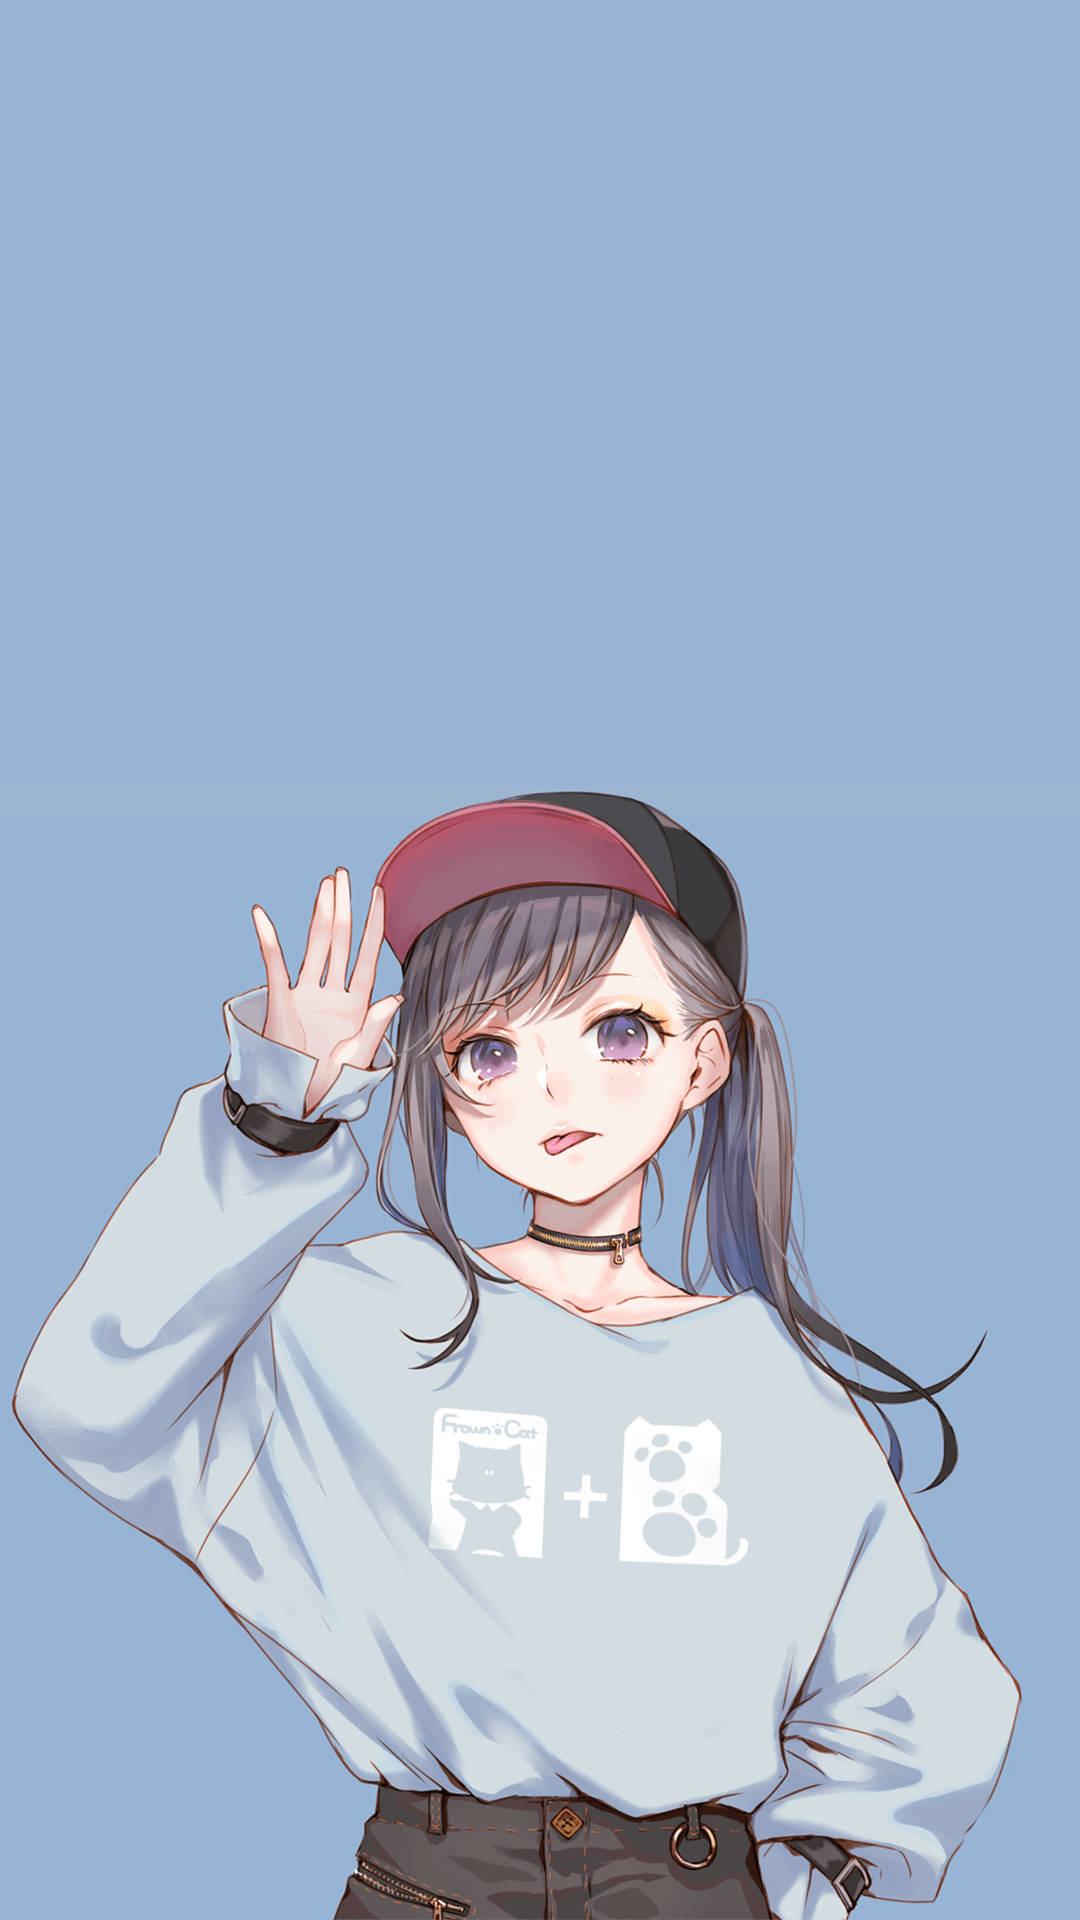 1080X1920 Anime Girl Wallpaper and Background